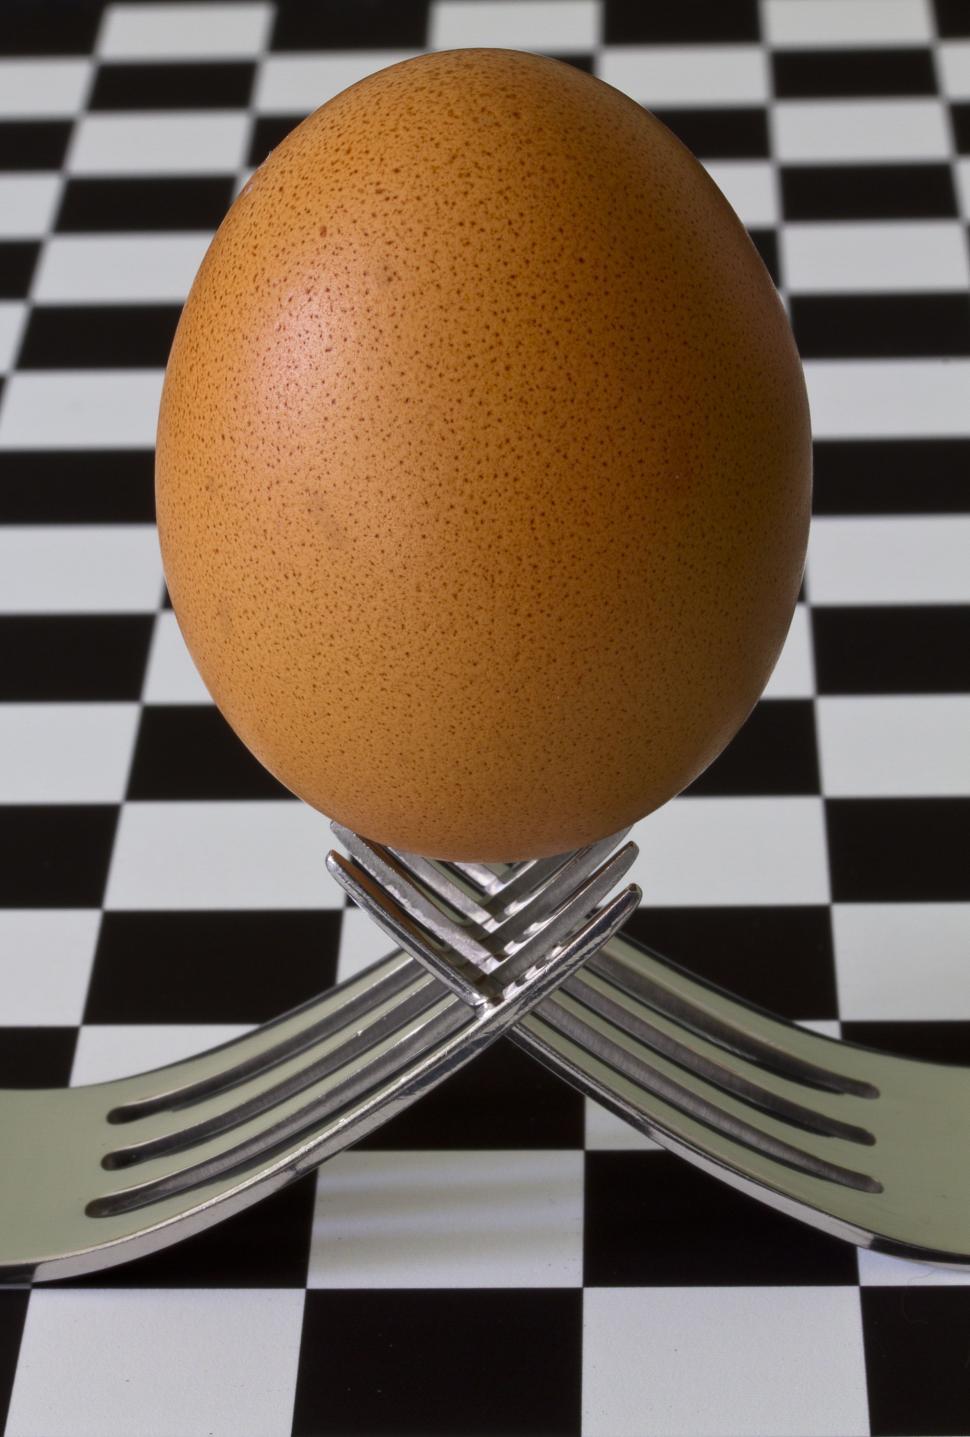 Free Image of One Egg and Two Forks  